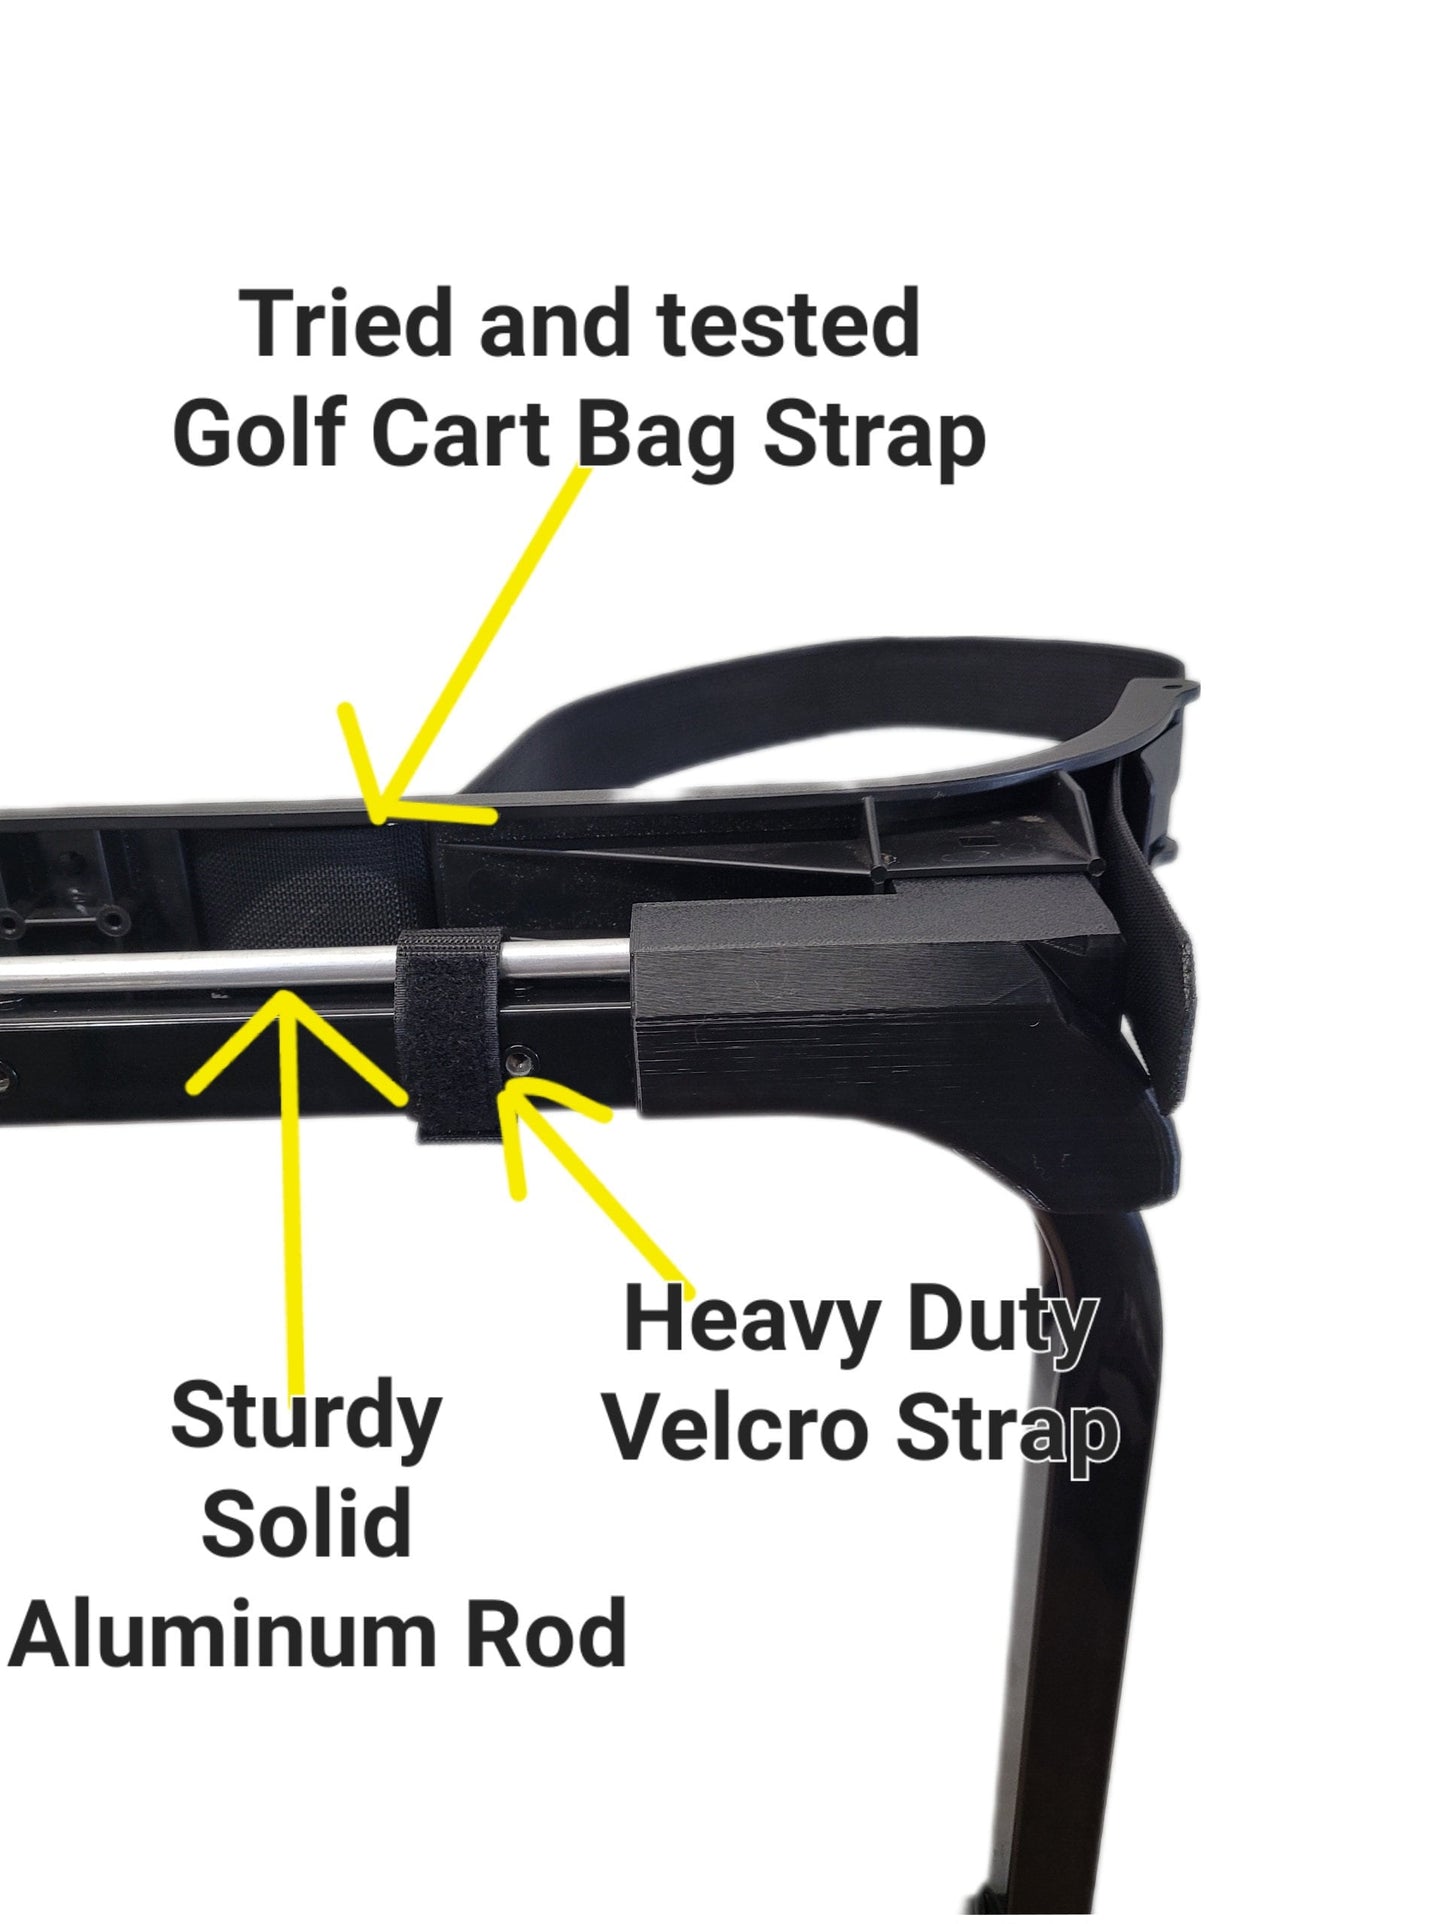 EZGO Golf Cart Golf Bag Holder Attachment, Easily Removable, No Drilling Required, fits S4, VALOR, RXV w/ 24" Rear Flip Seat Square Grab Bar